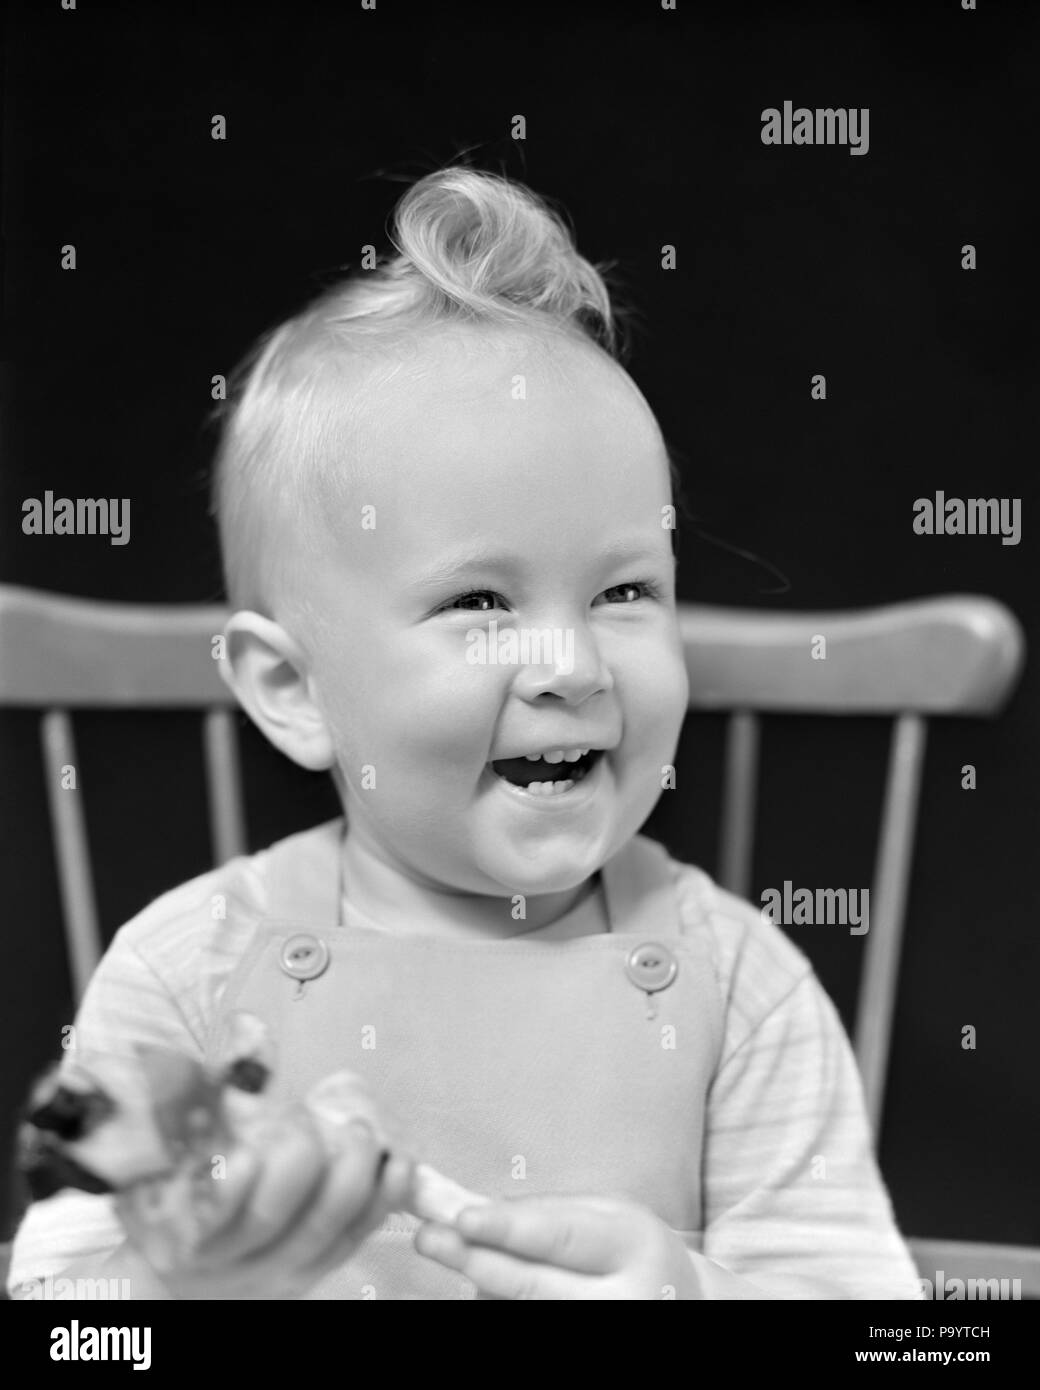 1940s PORTRAIT SMILING BABY SITTING IN WINDSOR STYLE CHAIR HOLDING TOY - j9245 HAR001 HARS CHEERFUL IN SMILES JOYFUL BABY BOY WINDSOR CURL JUVENILES KEWPIE DOLL BLACK AND WHITE CAUCASIAN ETHNICITY HAR001 OLD FASHIONED Stock Photo